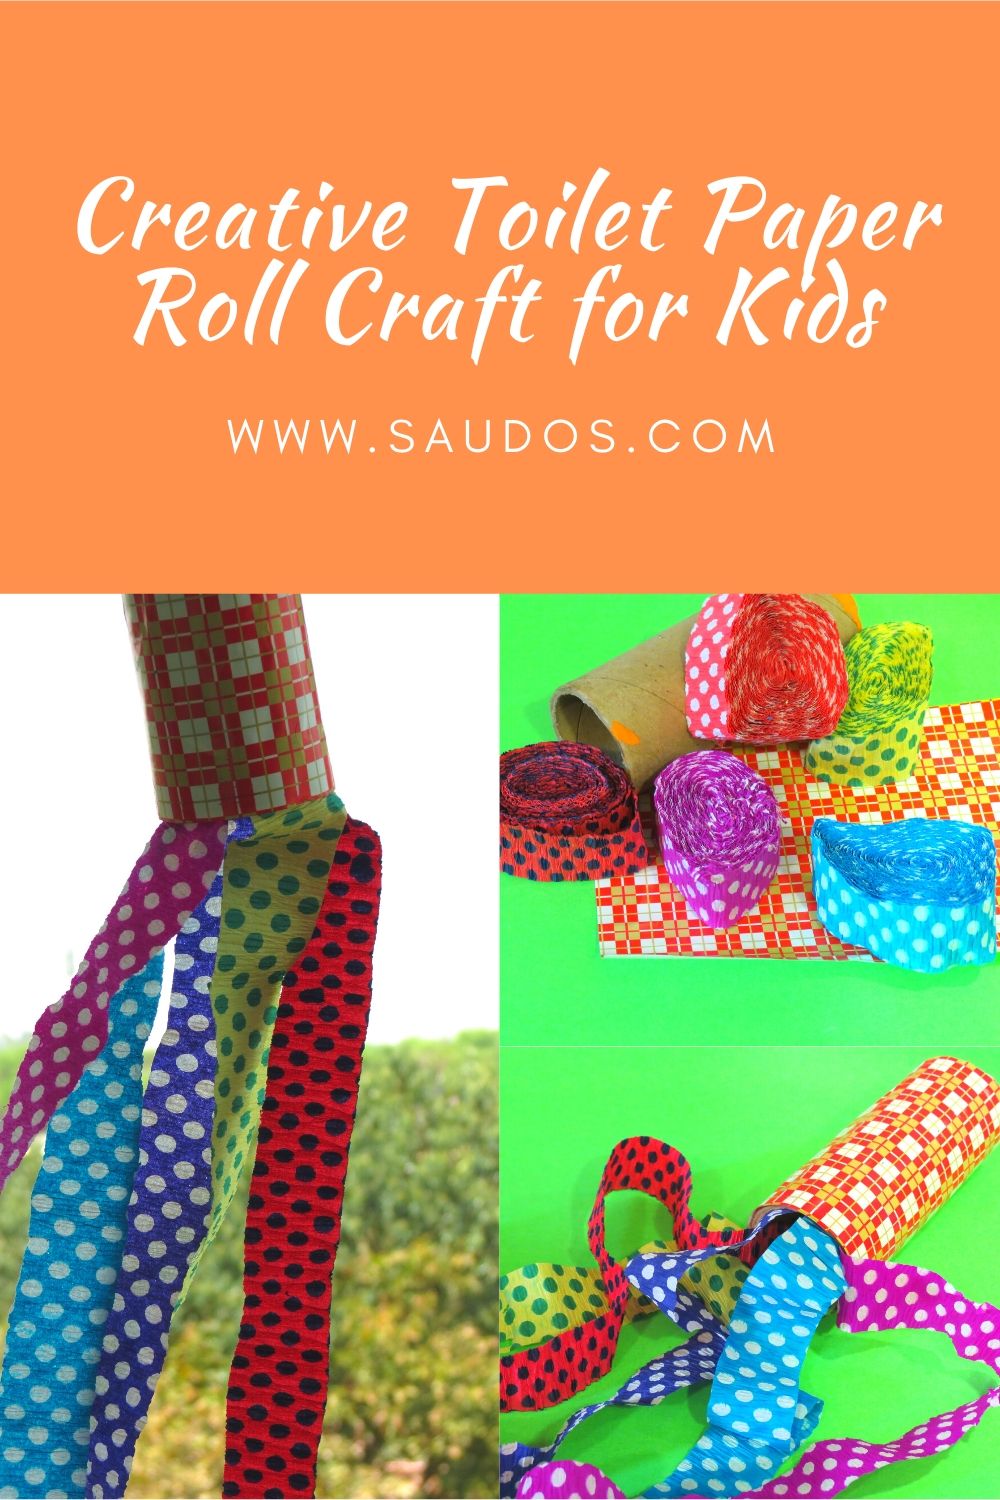 Creative Toilet Paper Roll Craft for Kids